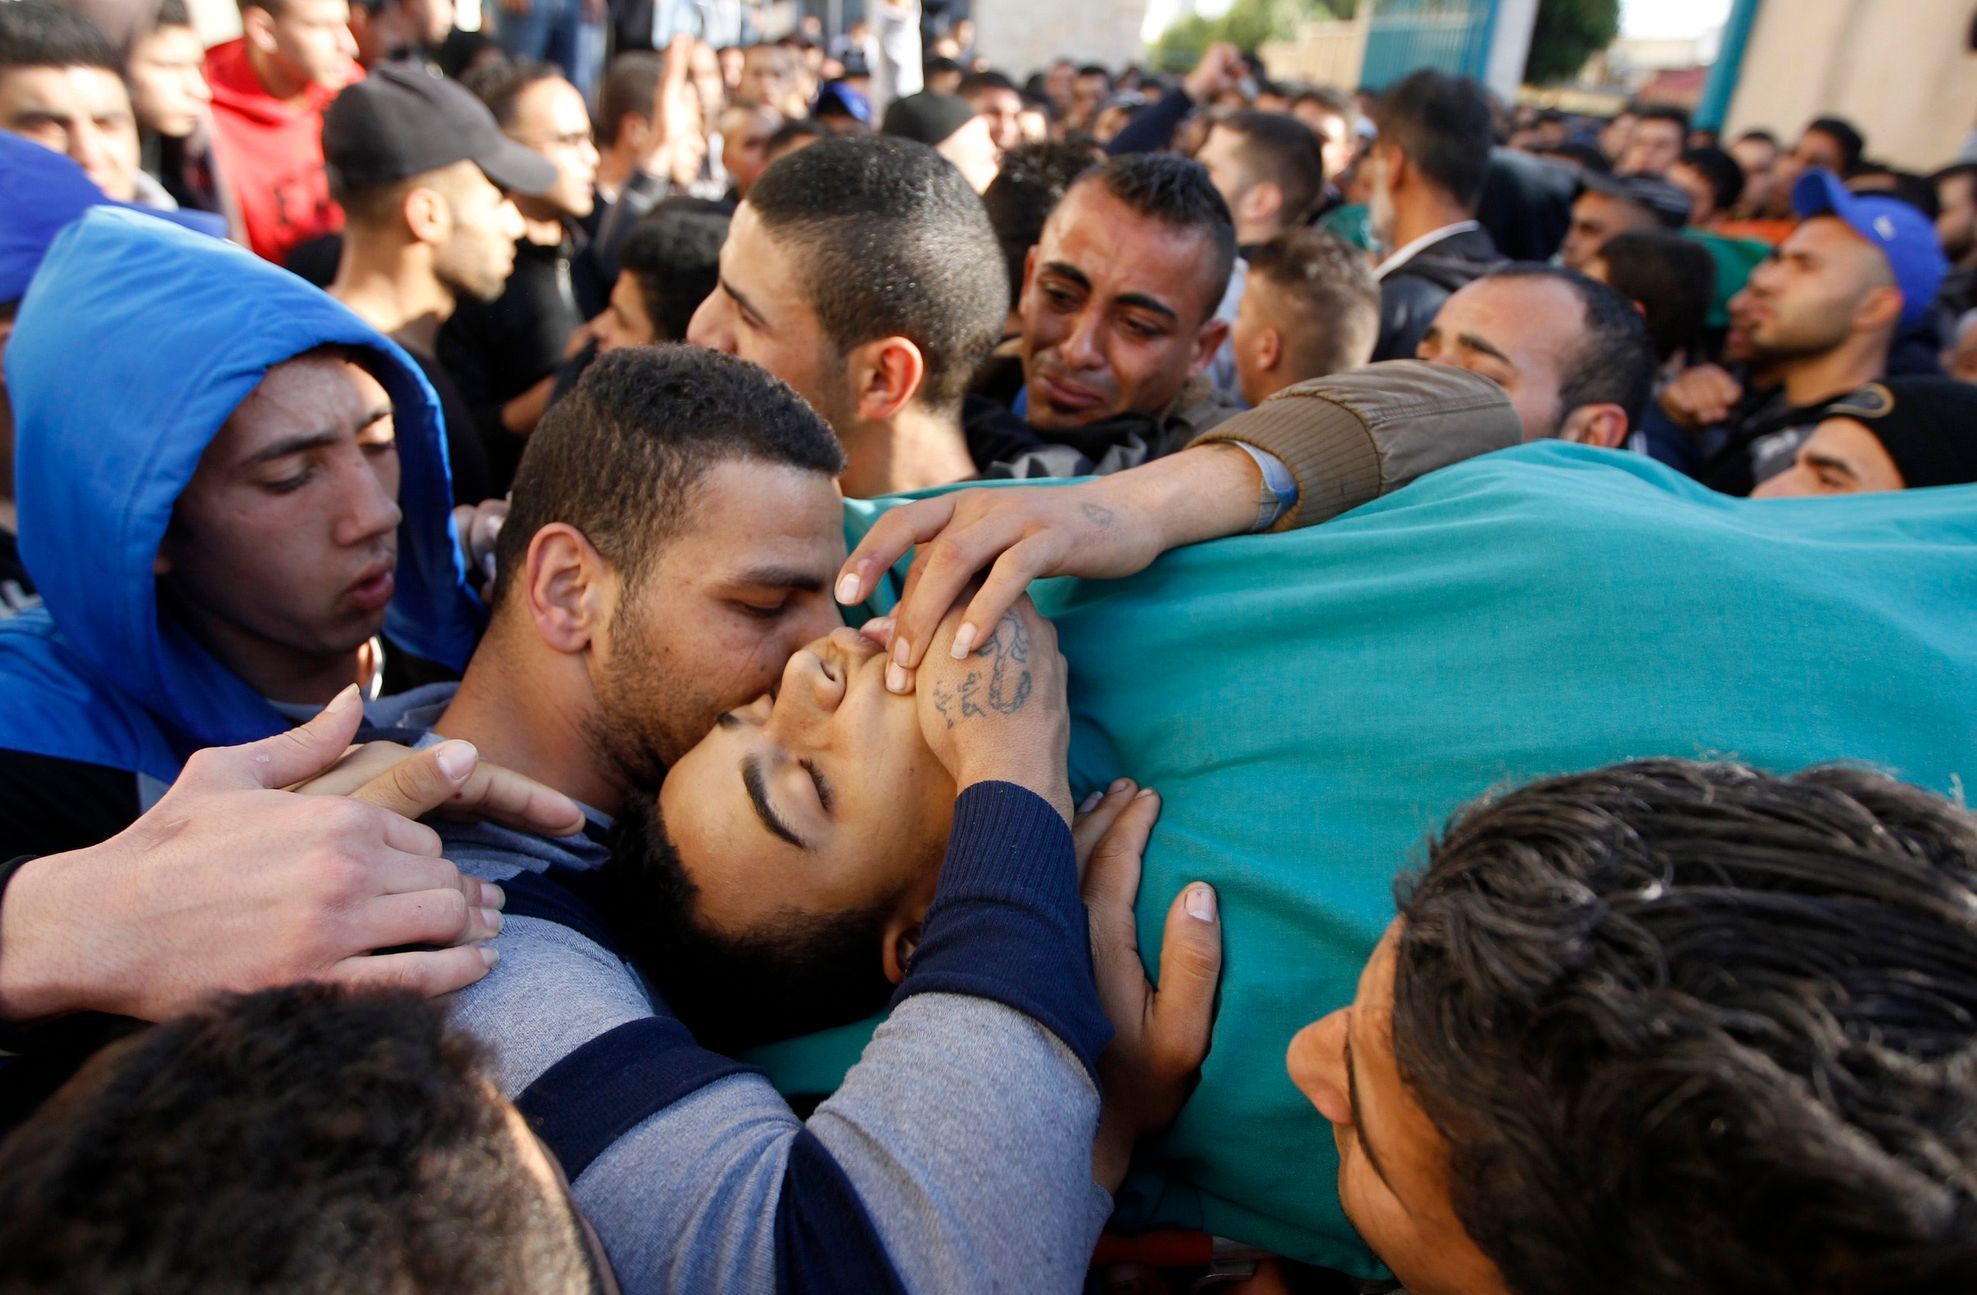 Palestinians shout slogans as they carry the body of militant Hamza Abu Alhija, in the West Bank refugee camp of Jenin